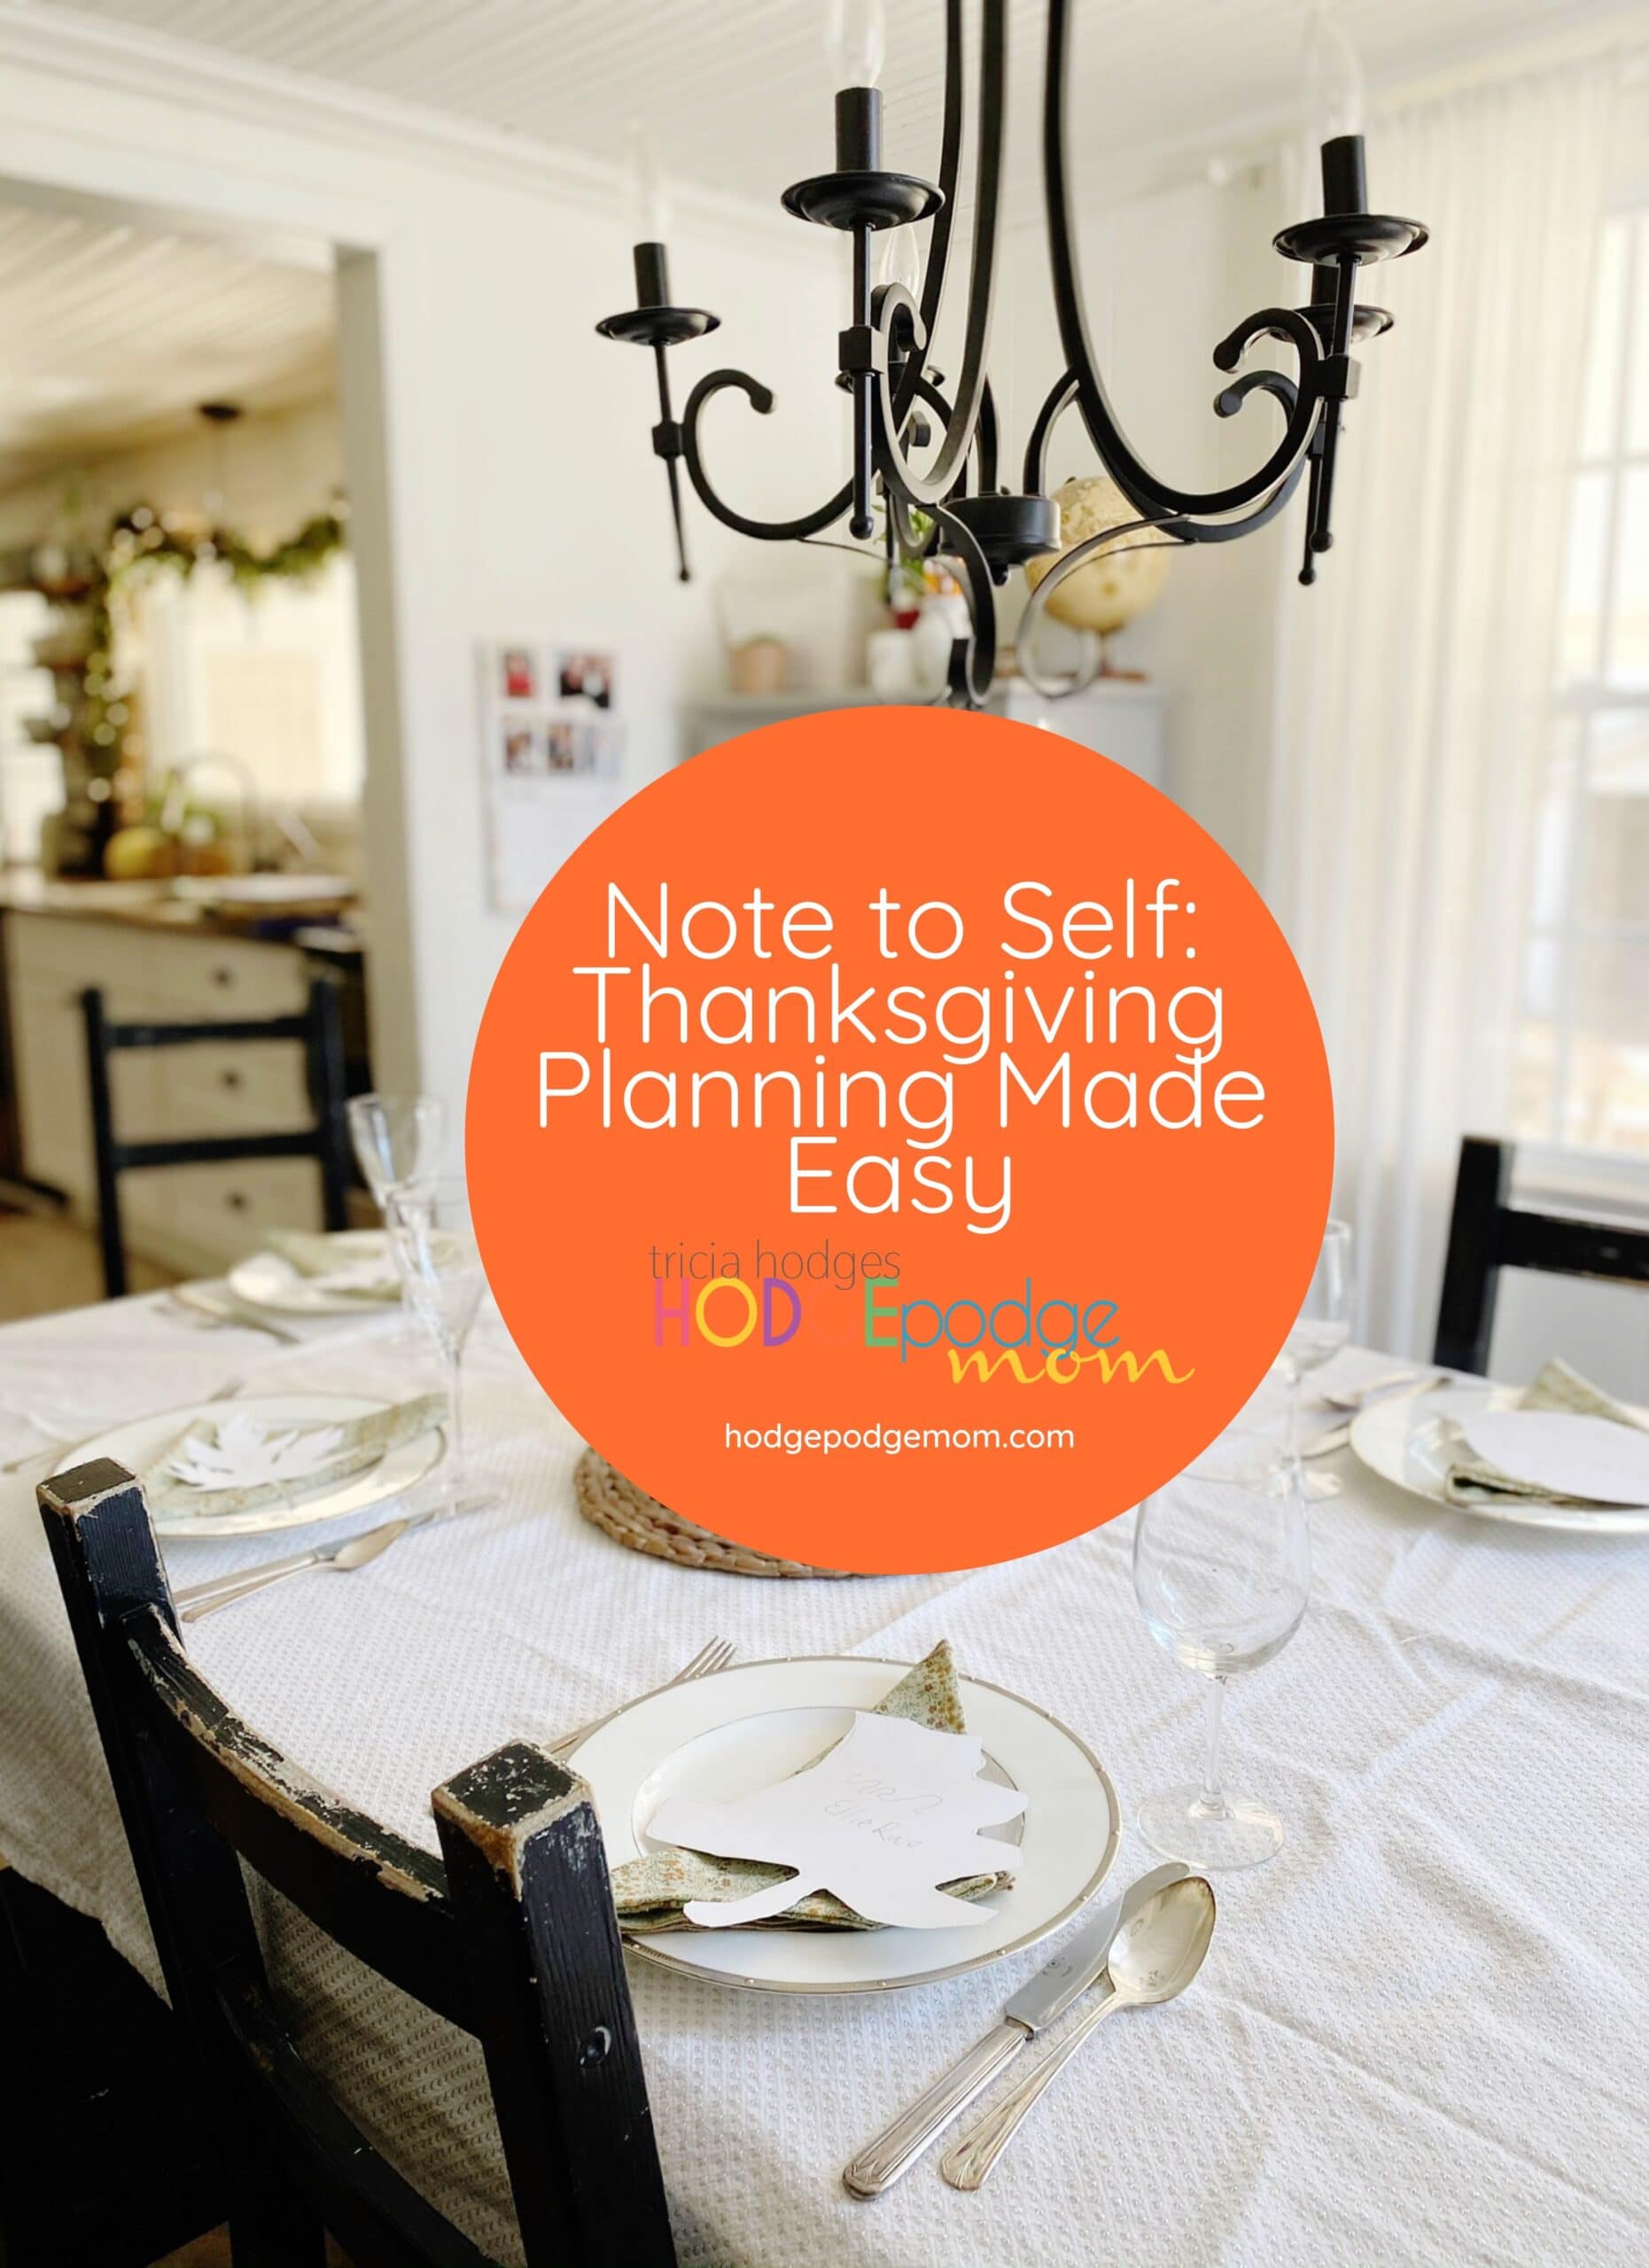 Note to Self: Thanksgiving Planning Made Easy